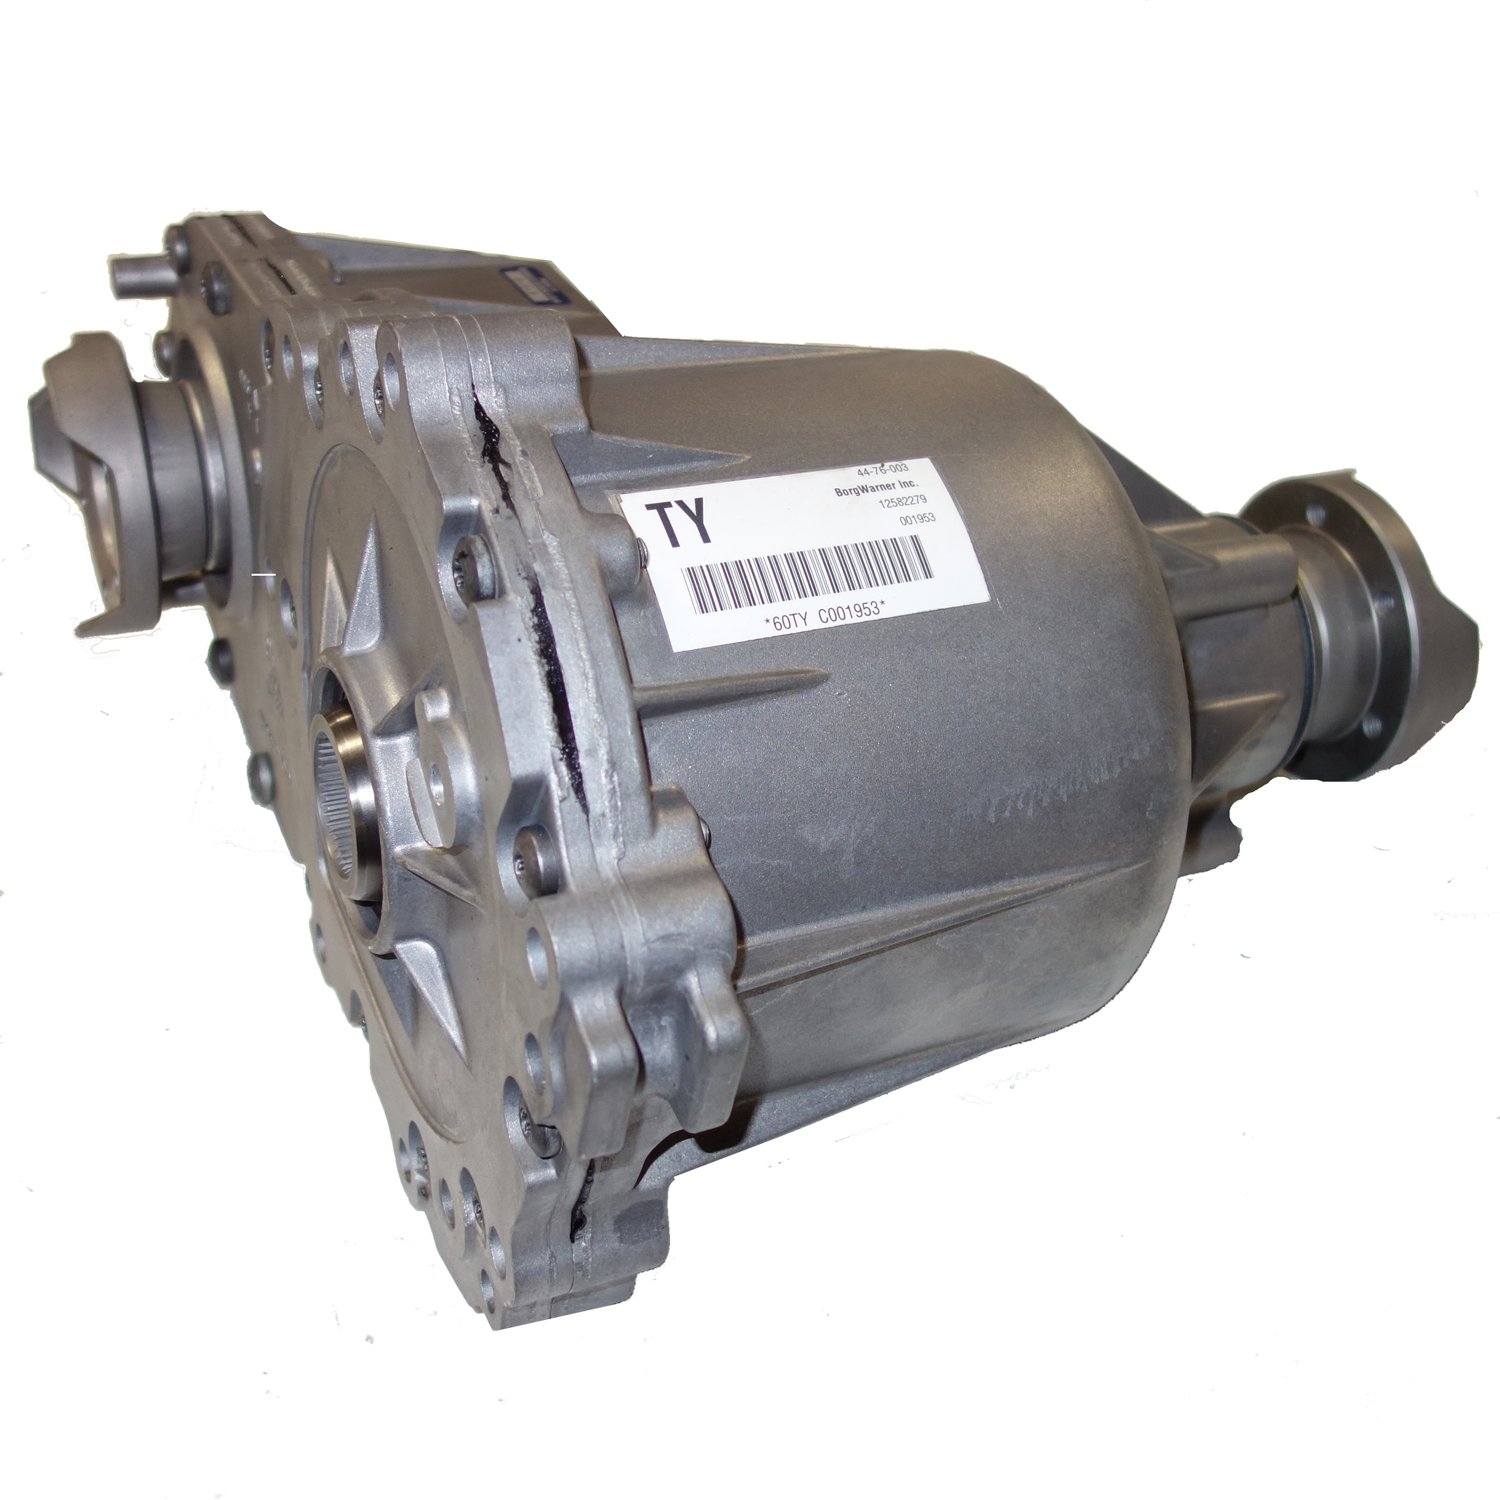 Remanufactured BW4477 Transfer Case for GM 2010-14 CTS